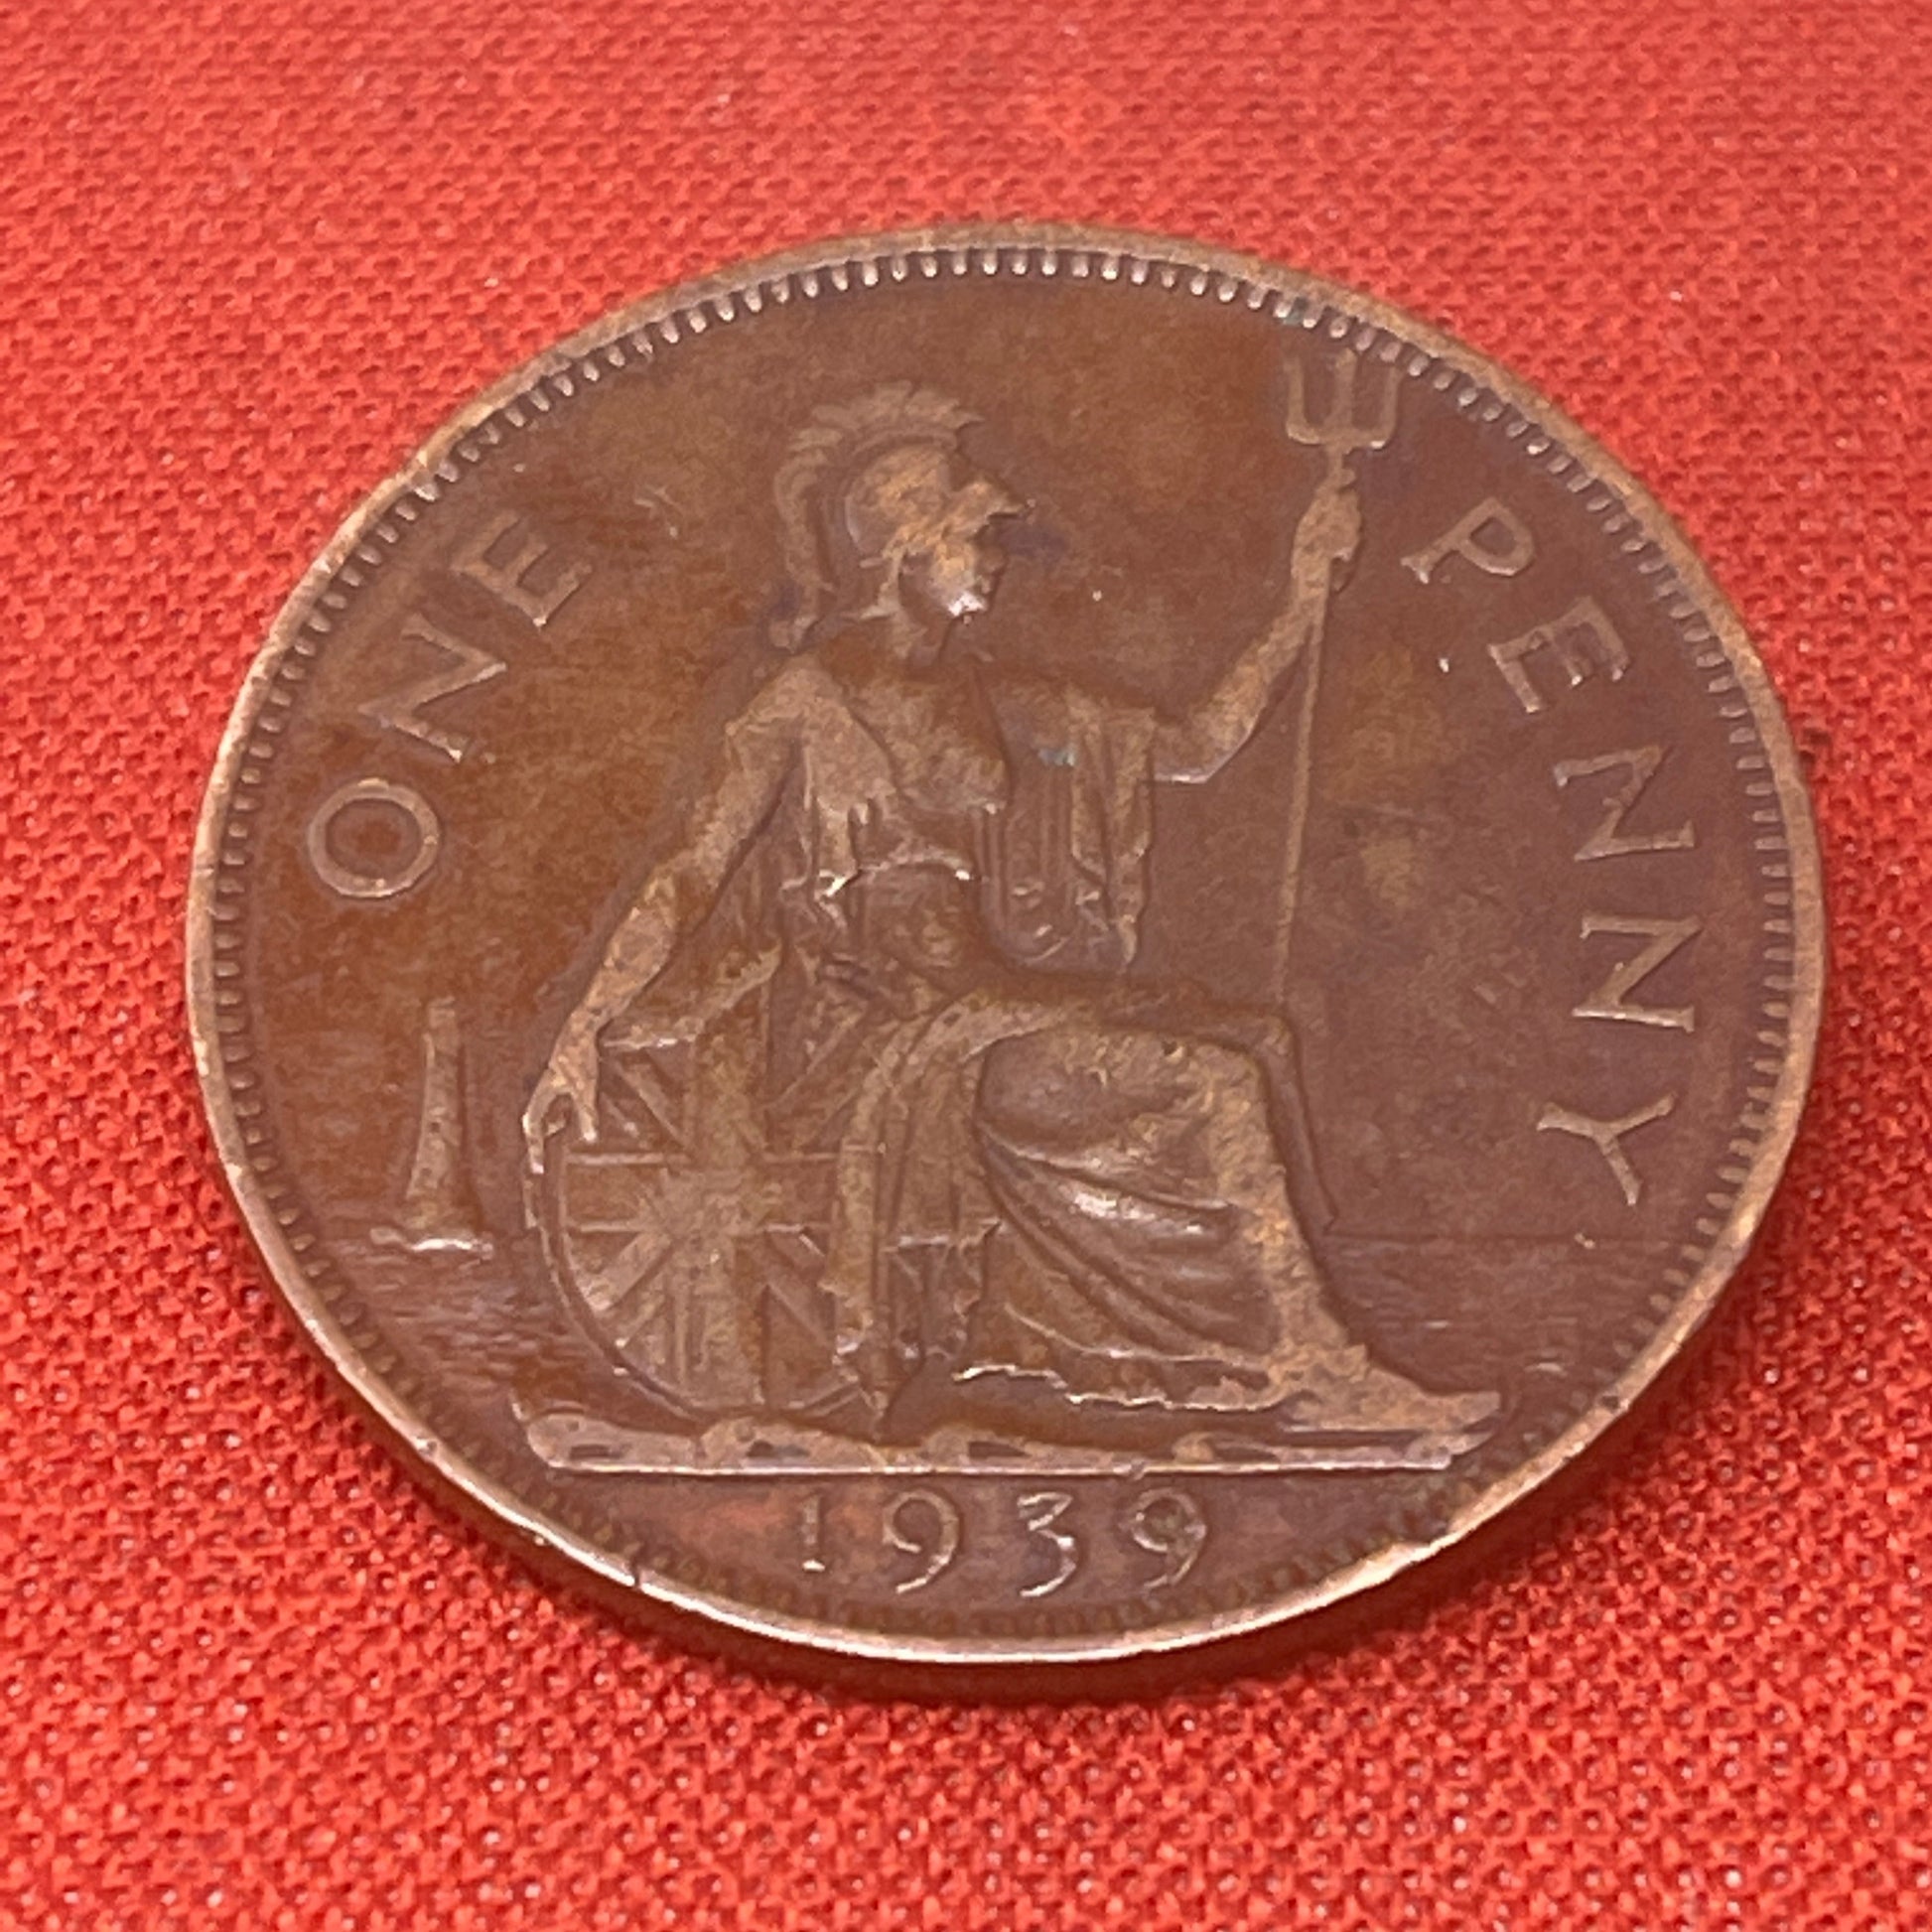 King George V1 One Penny Dated 1939